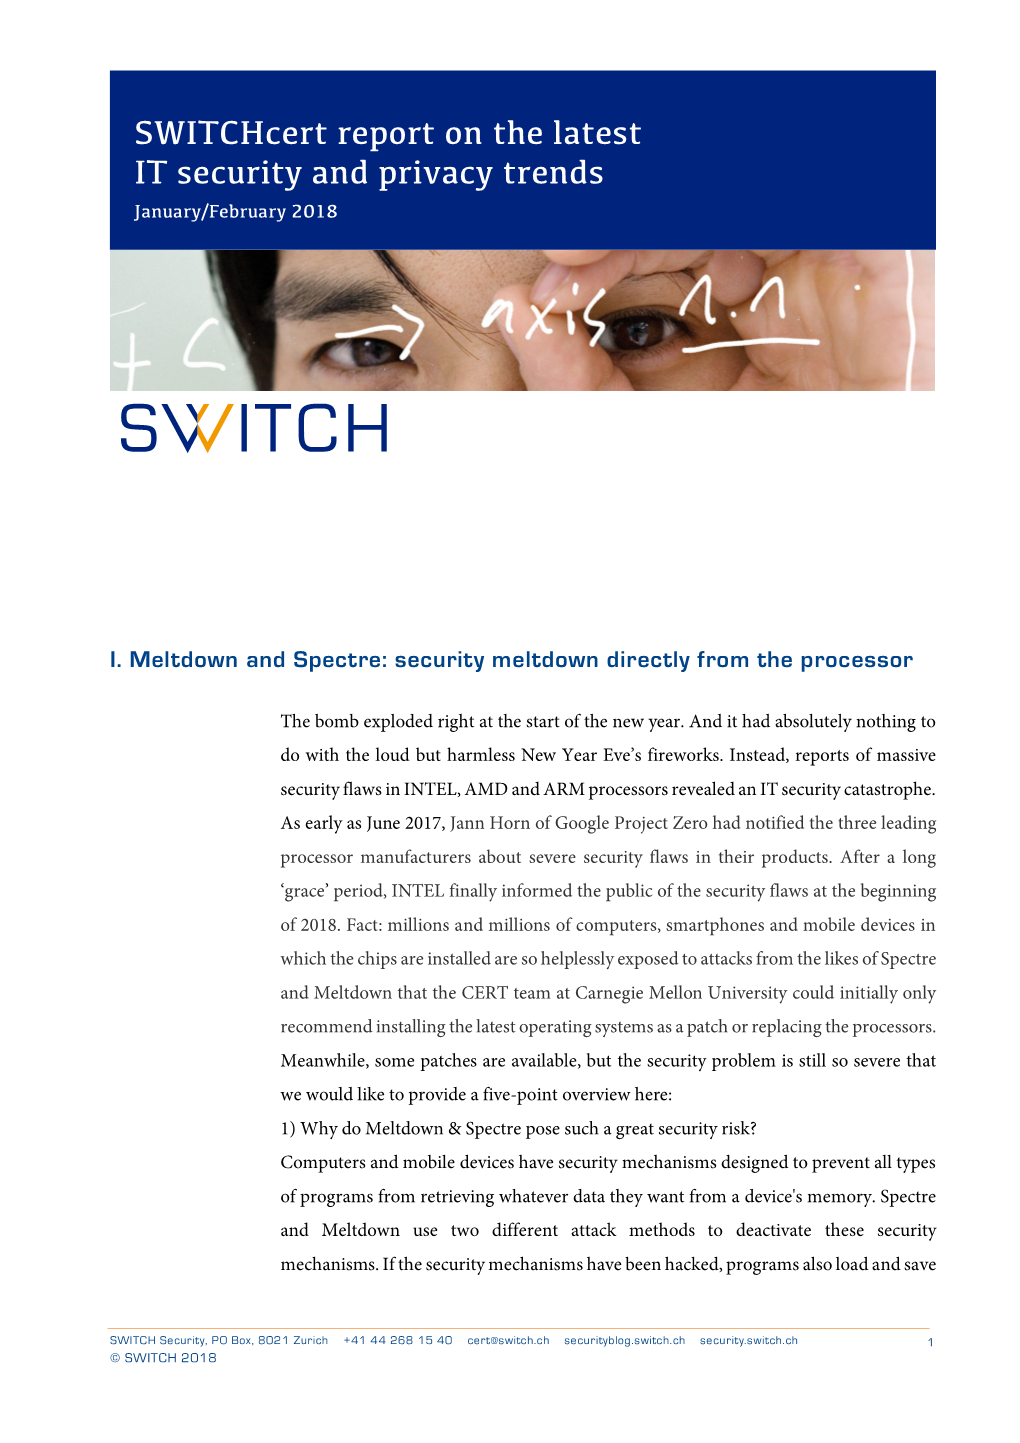 Switchcert Report on the Latest IT Security and Privacy Trends January/February 2018